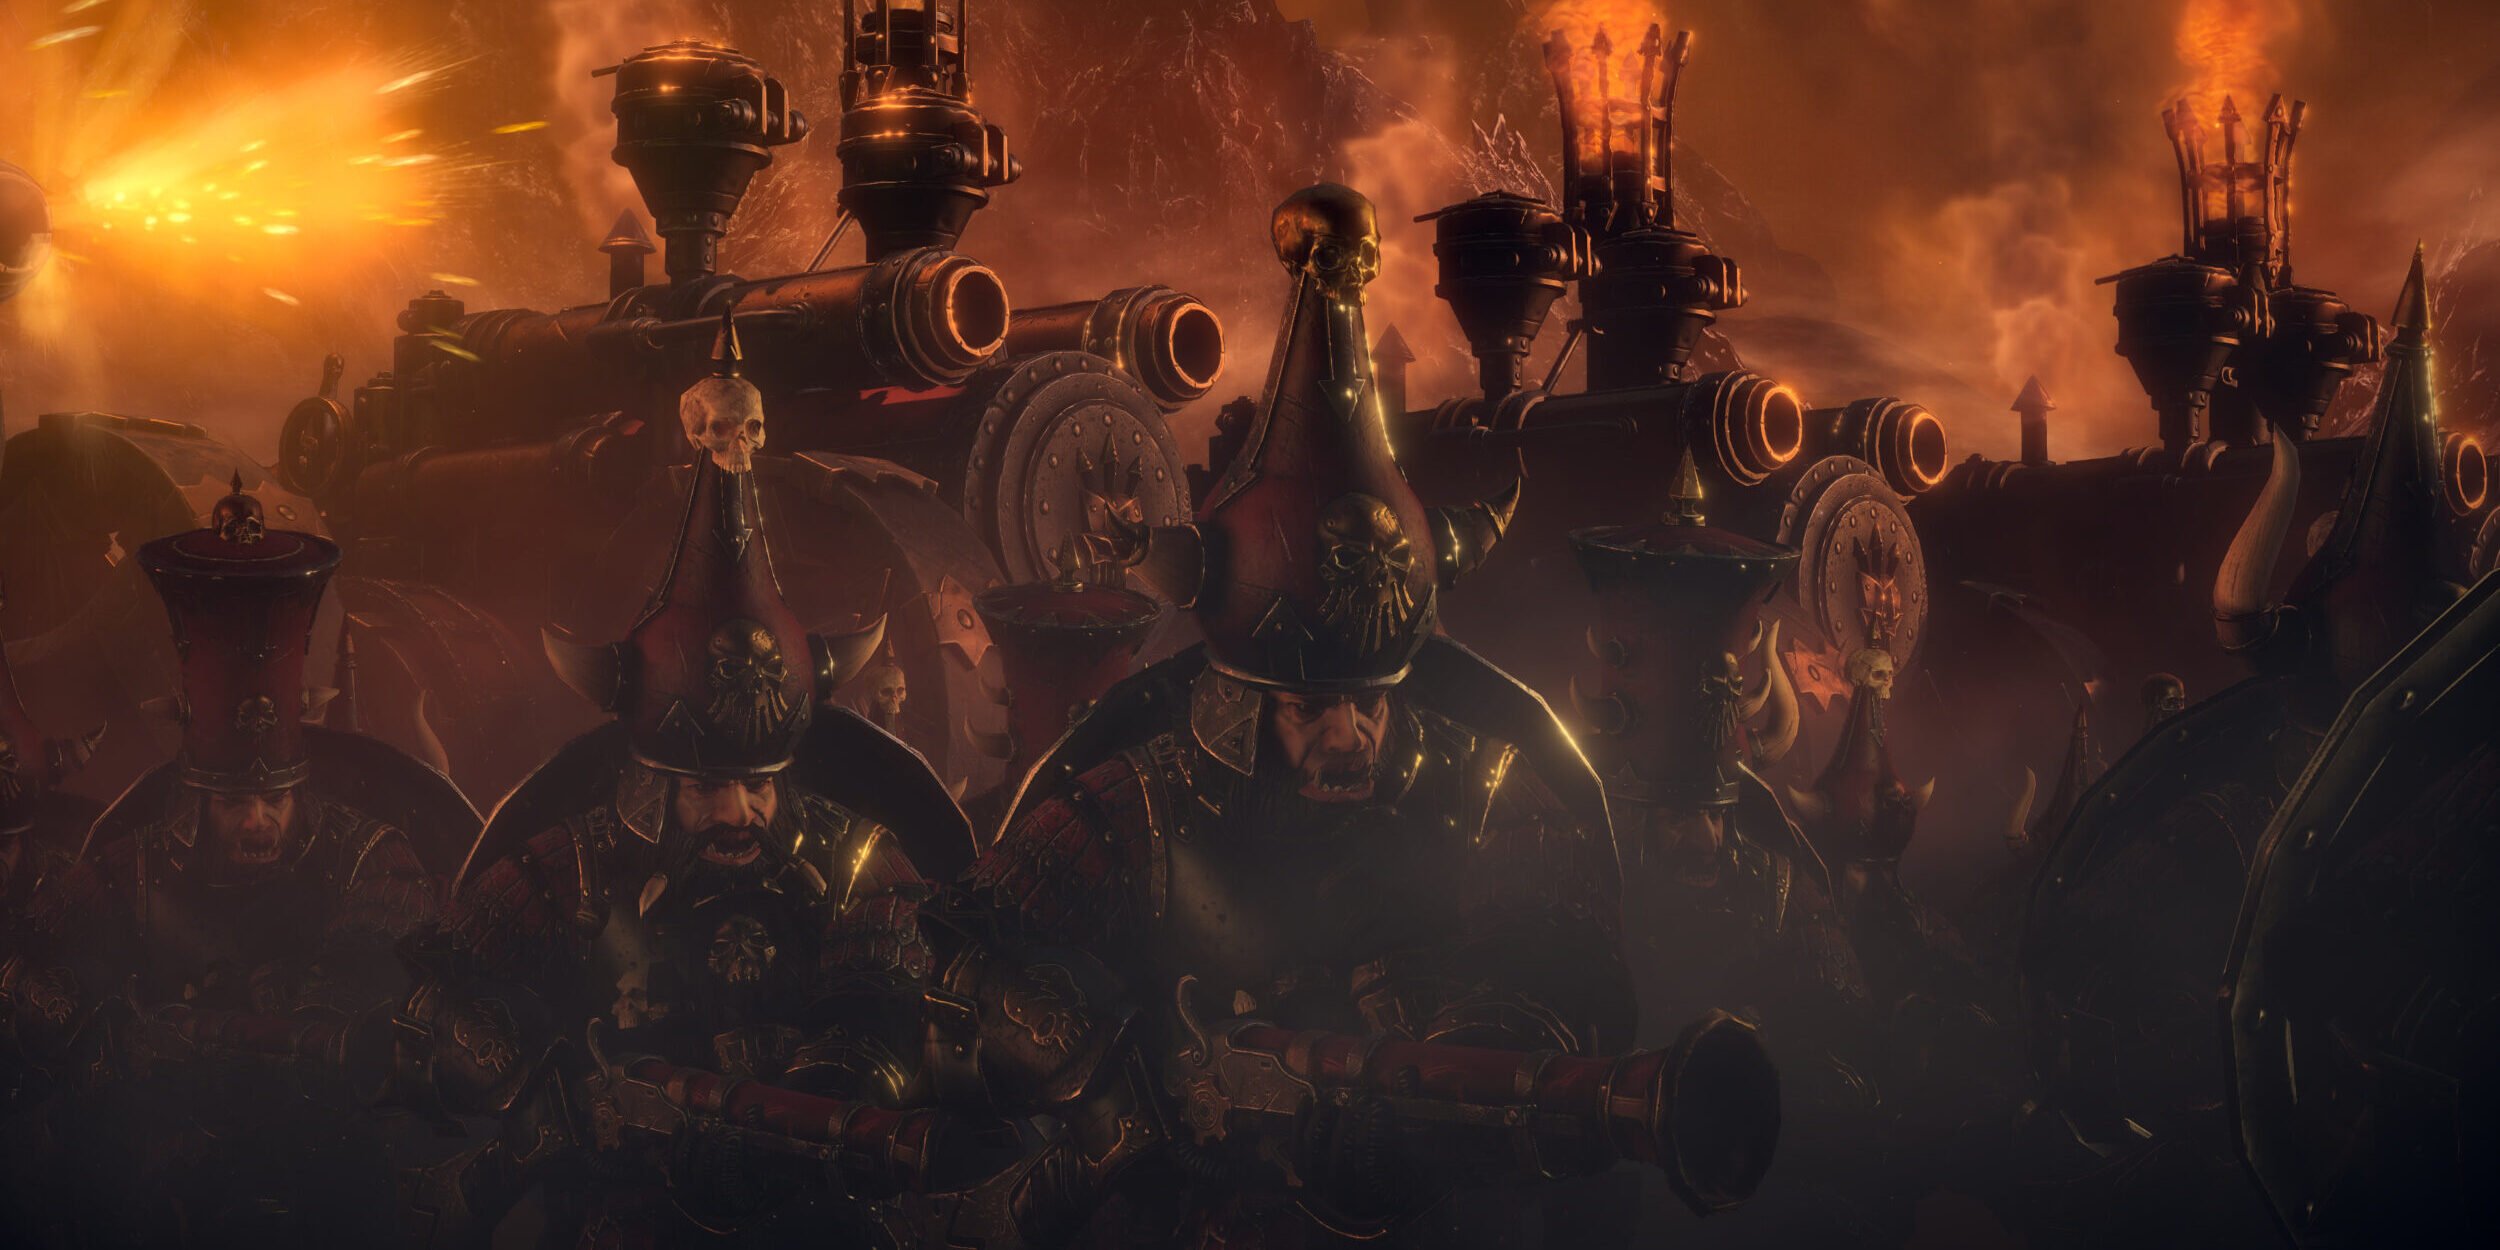 Chaos Dwarfs Warhammer Dlc Overview Forge Of The Chaos Dwarfs Game